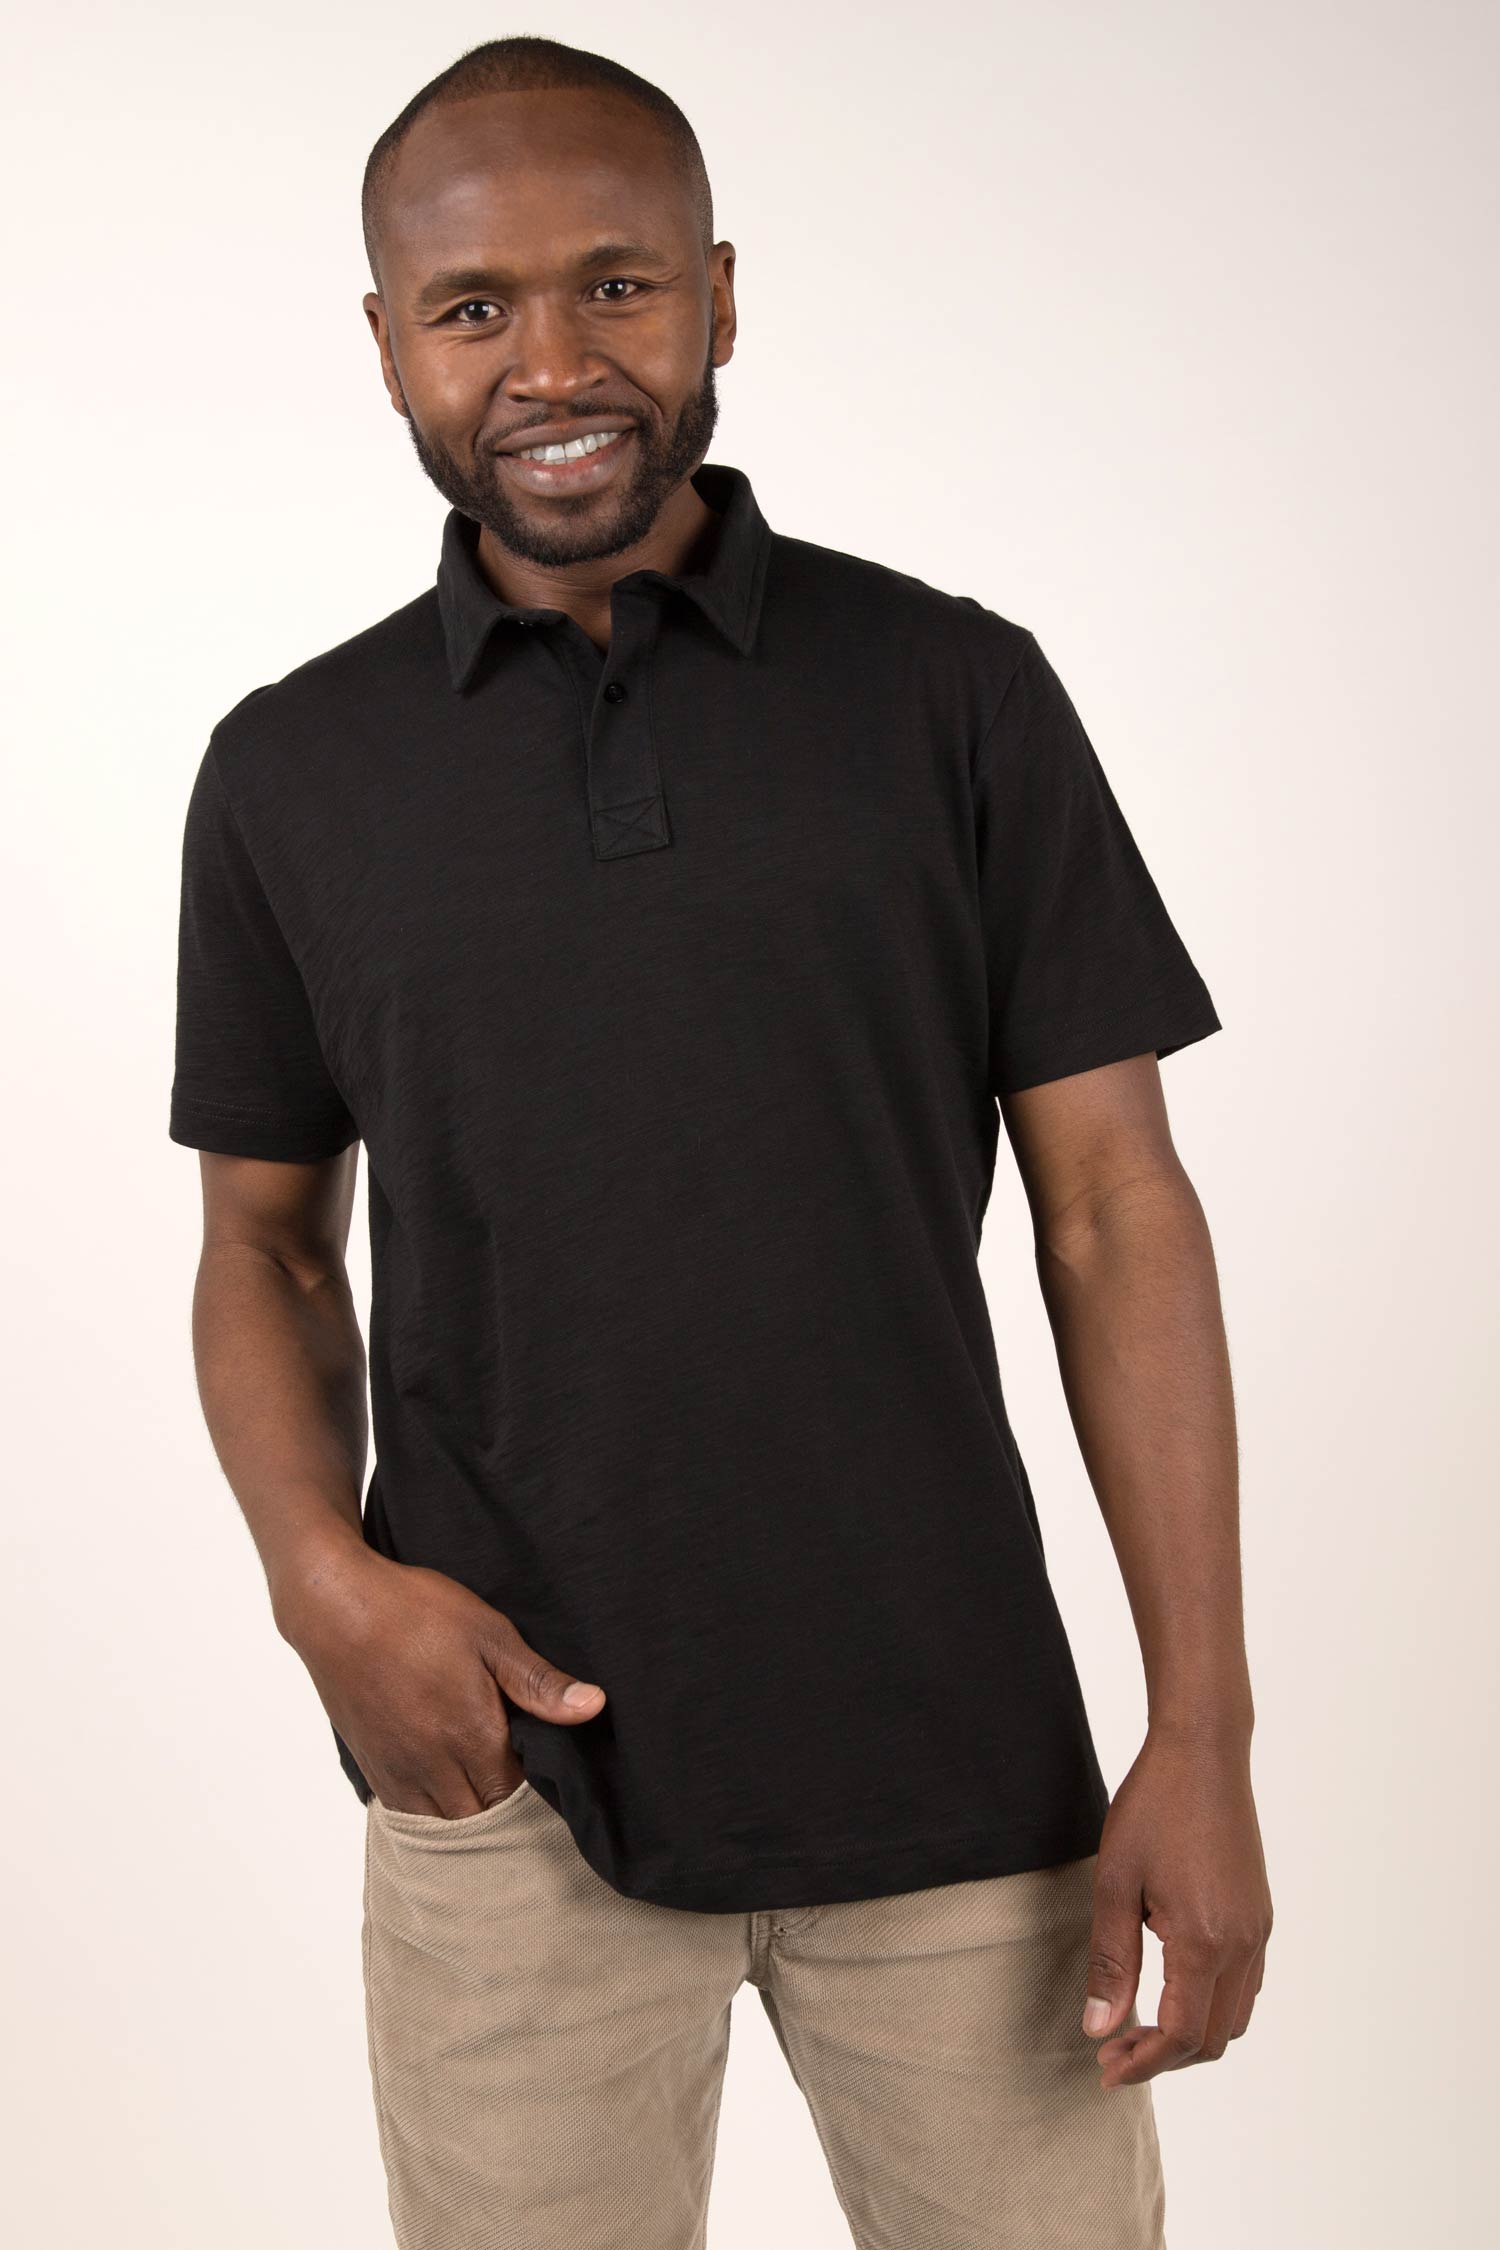 Black male model smiling at camera wearing a Black alpaca wool sub polo shirt. He has one hand in his pocket and is leaning on his right leg.